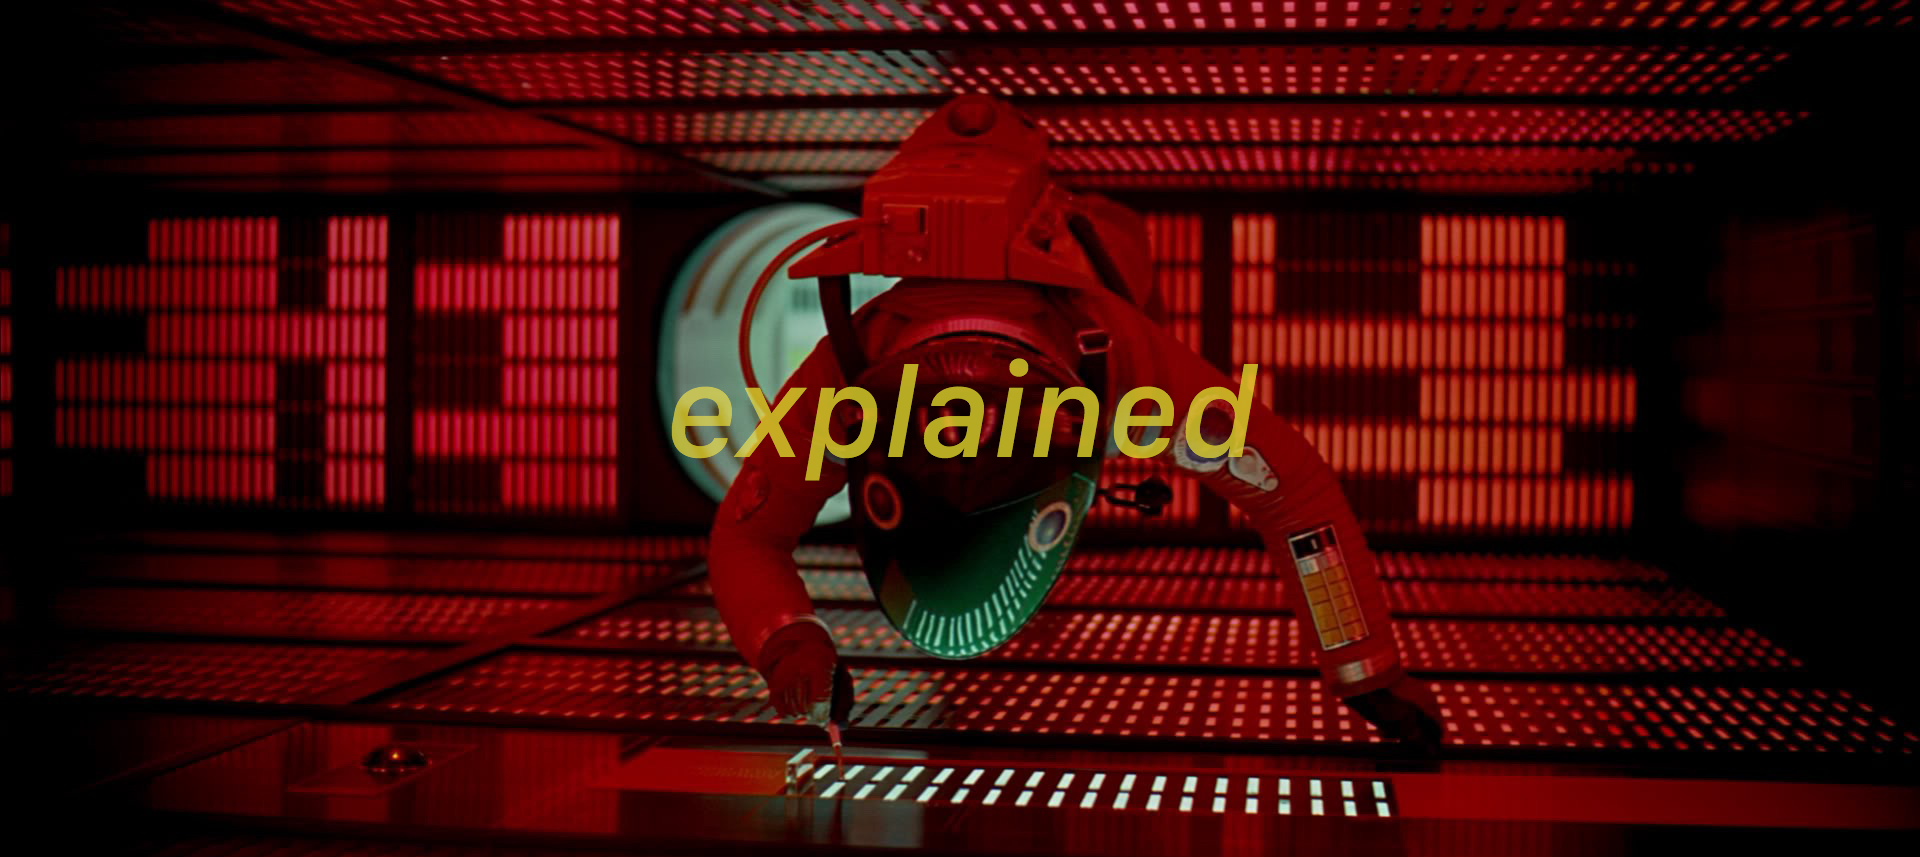 2001: A Space Odyssey — Explained, by Manny Rothman